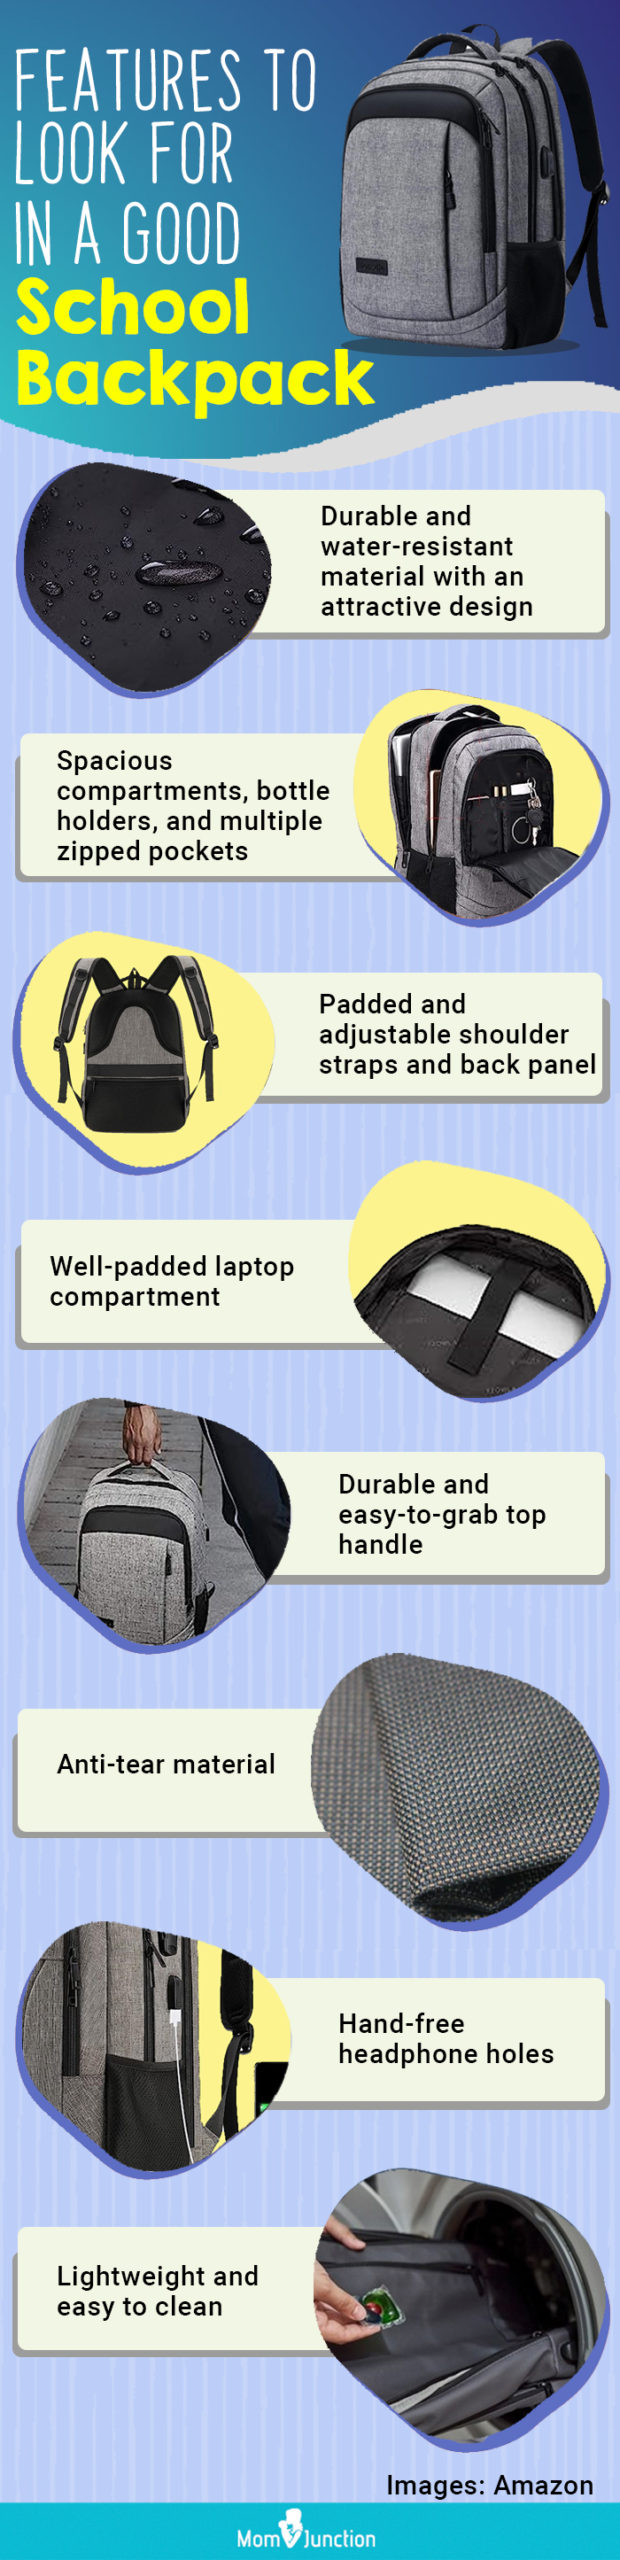 Features To Look For In A Good School Backpack (infographic)